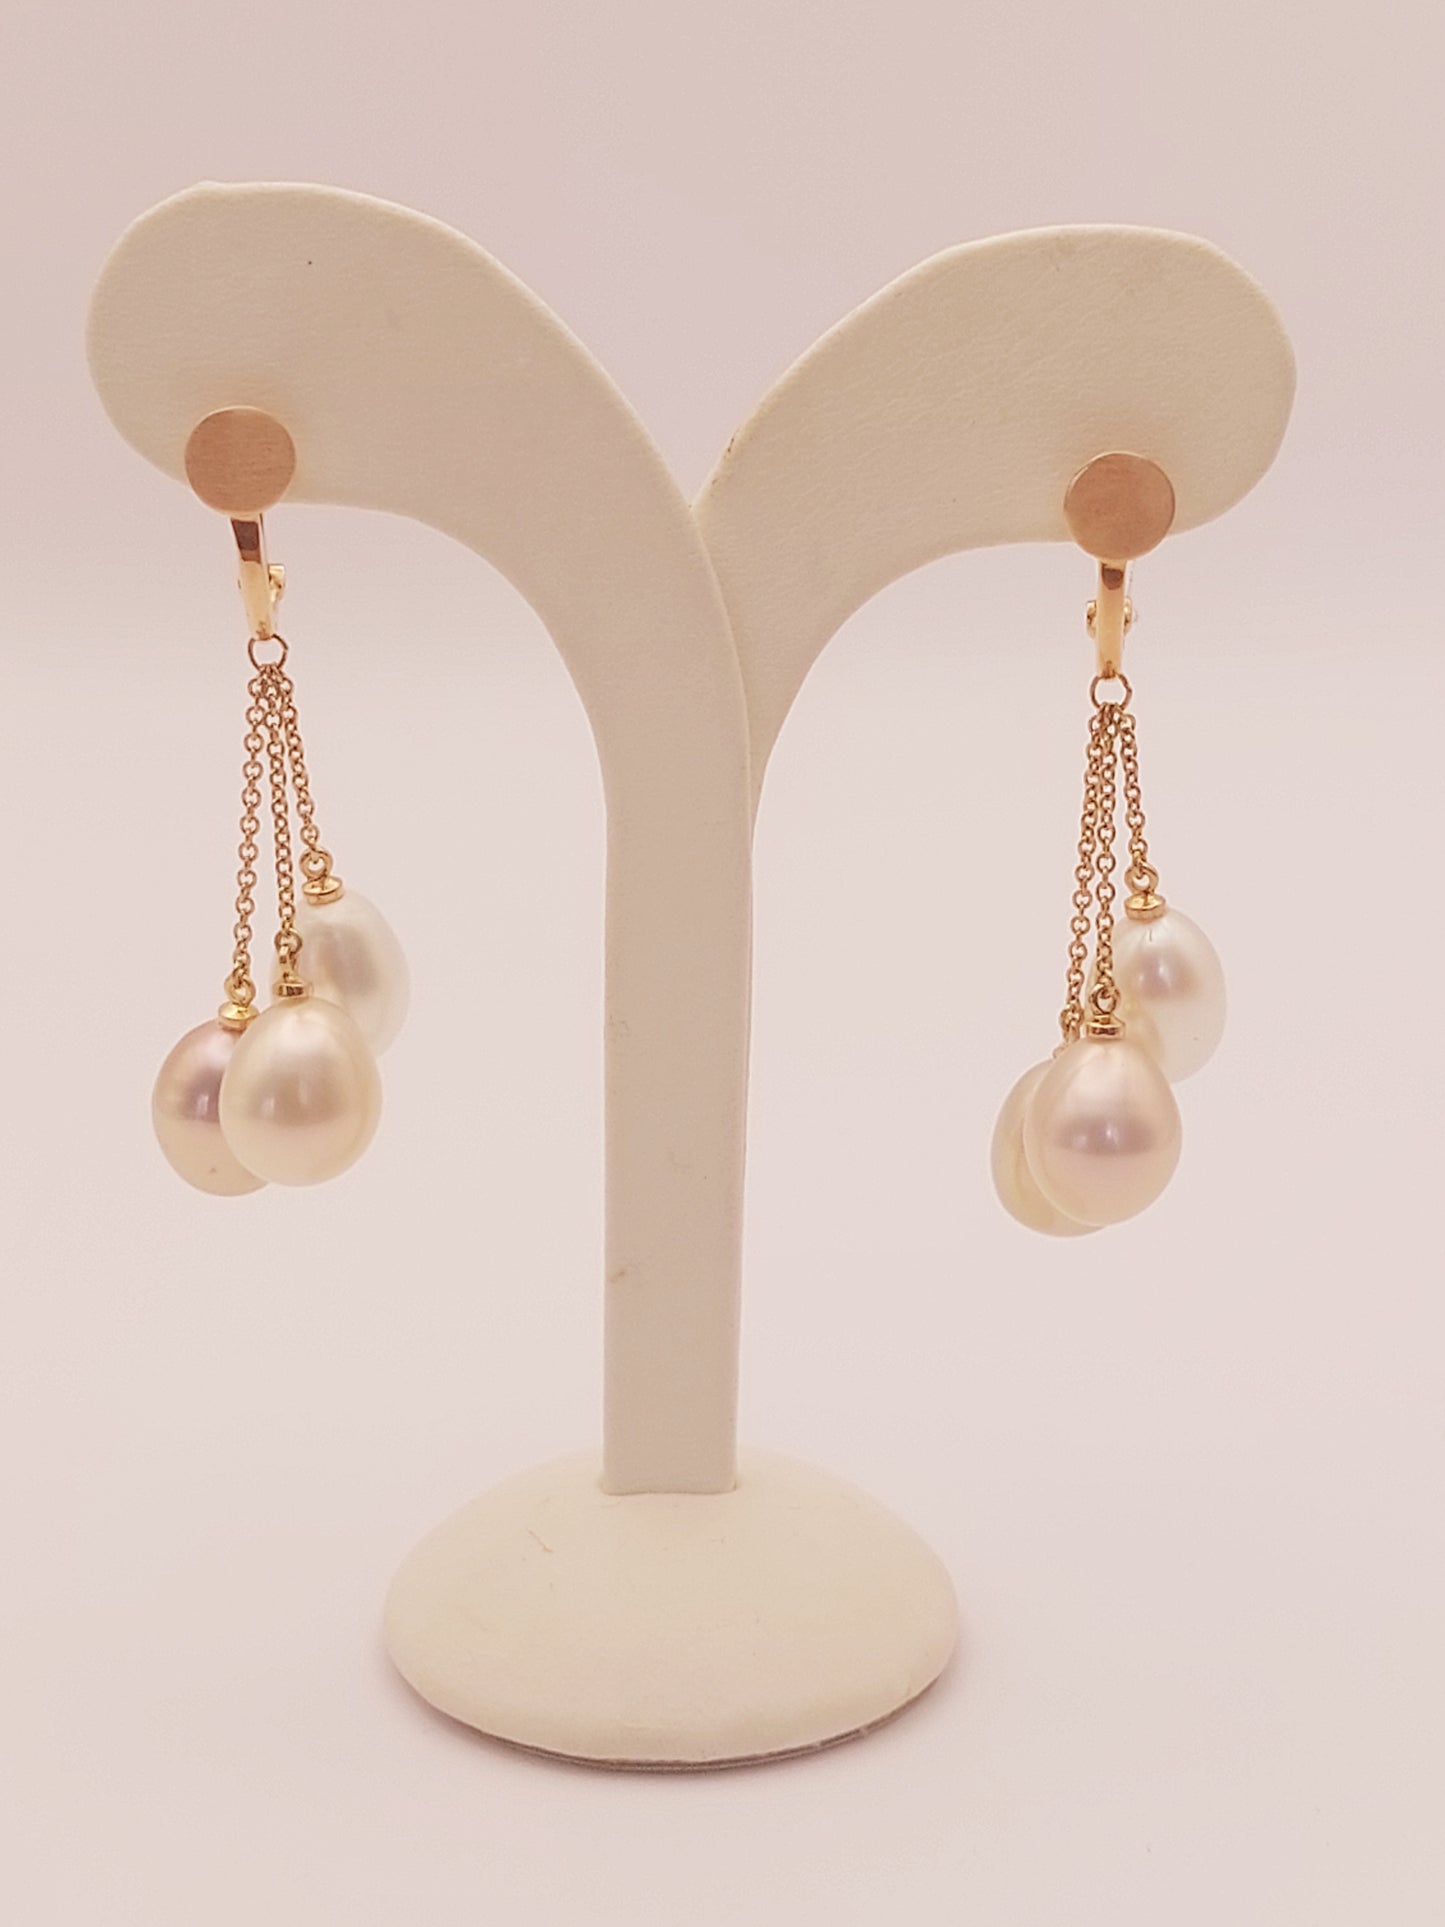 Long Freshwater and White South Pearl Earrings